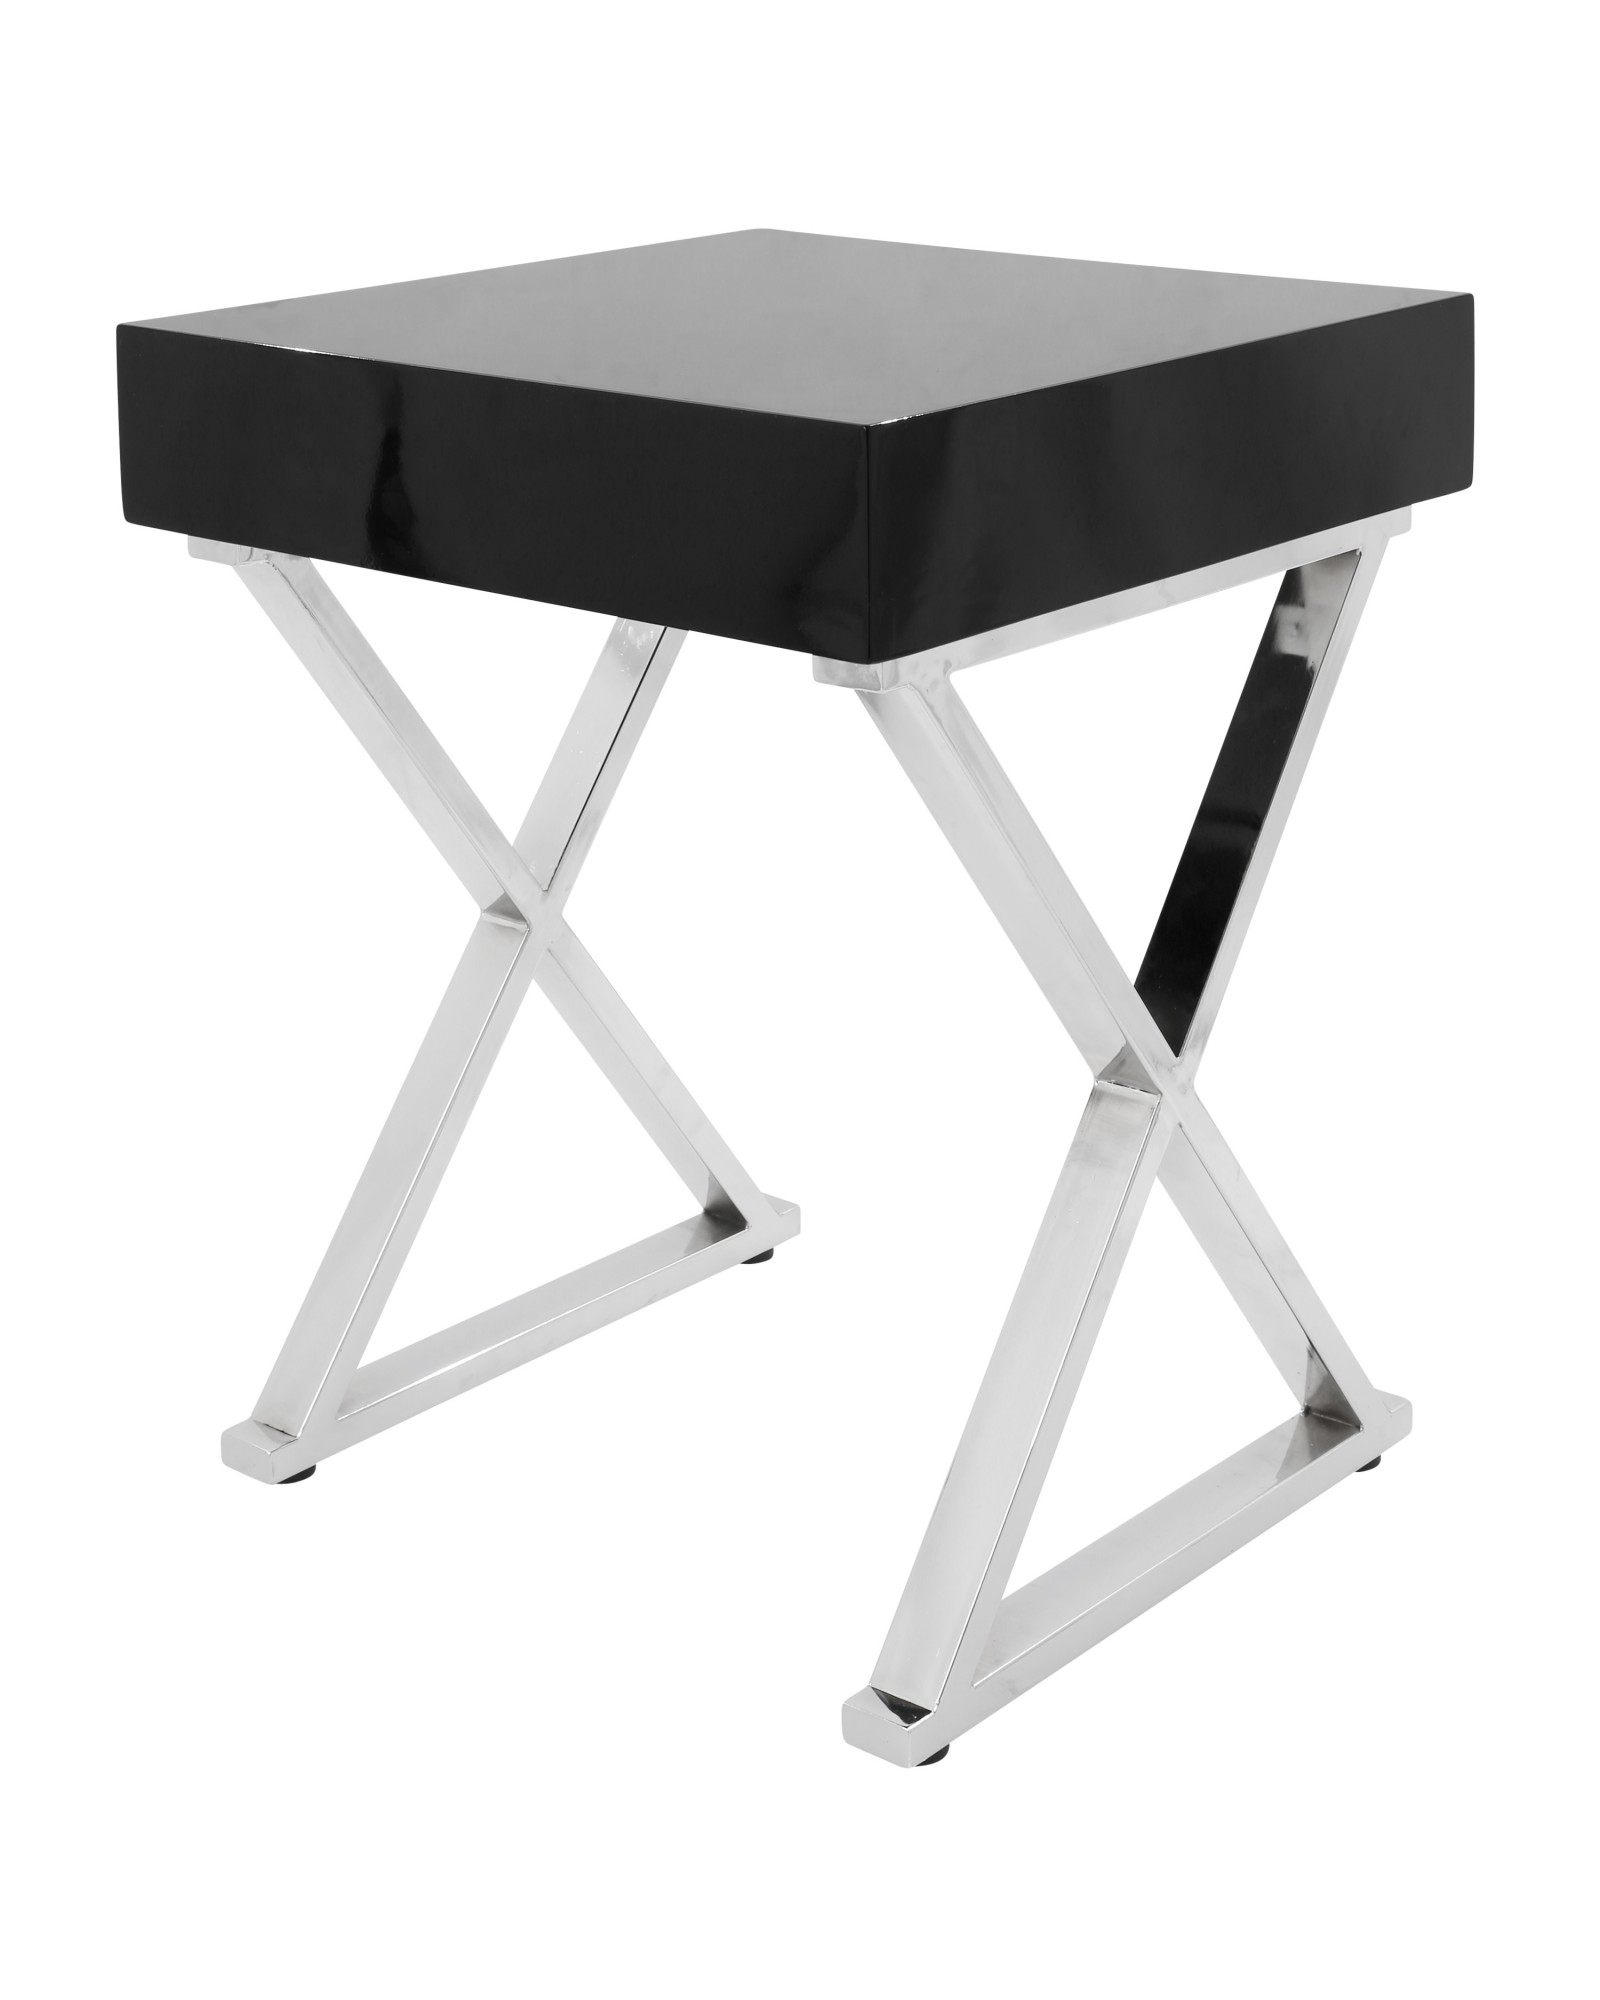 Luster Contemporary Side Table in Black and Chrome